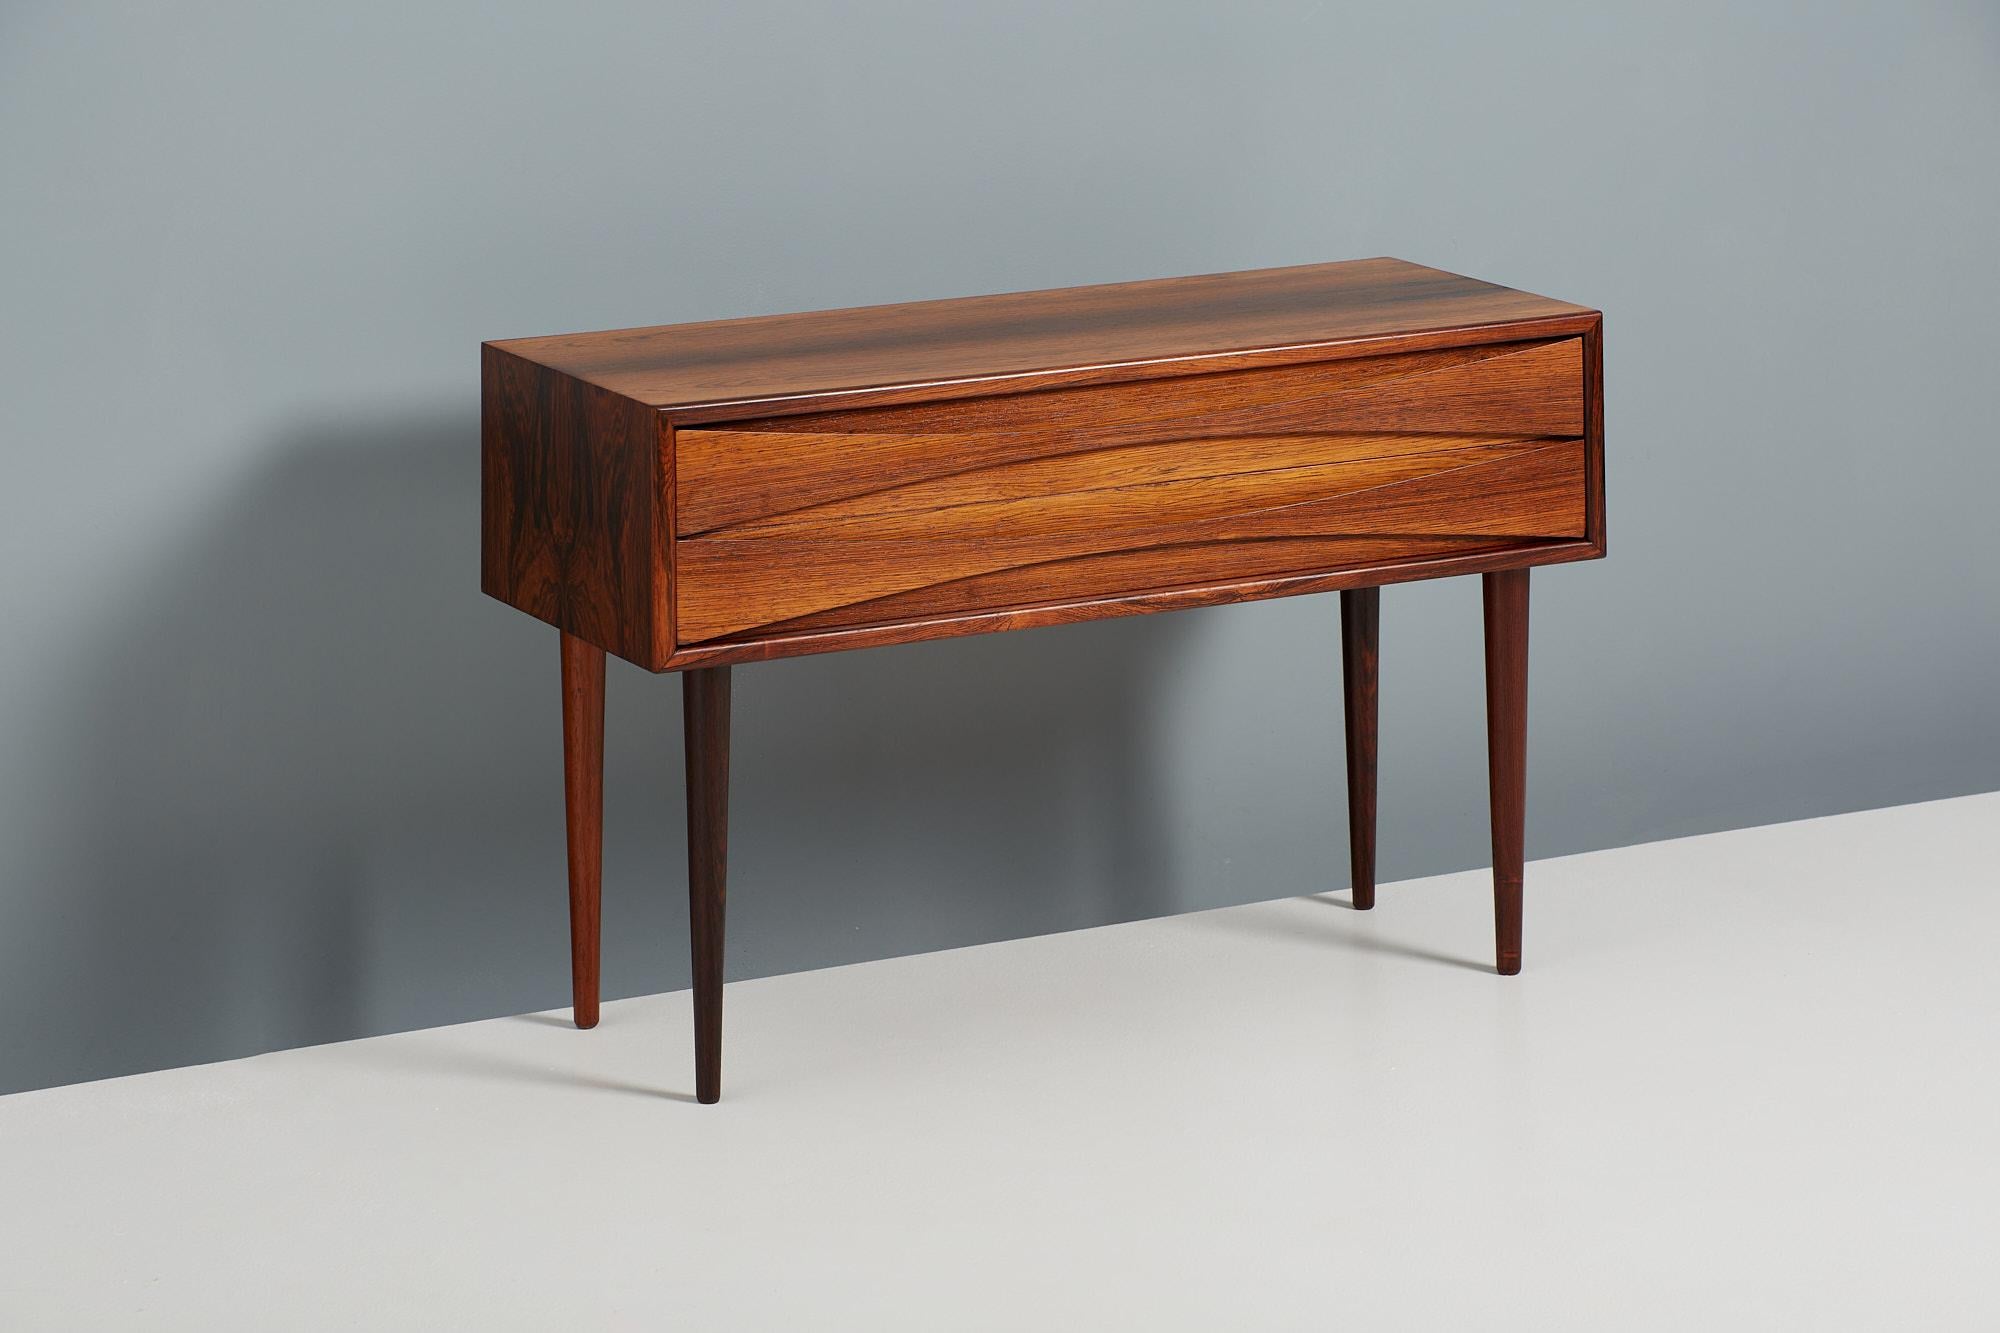 Niels Clausen

Low Chest, c1960

Rosewood chest by Niels Clausen for NC Mobler, Odense, Denmark. Produced c1960. Two drawers with trademark scalloped pulls and solid tapered legs.

Measures: width 80 cm 
Depth 32 cm 
Height 54 cm.